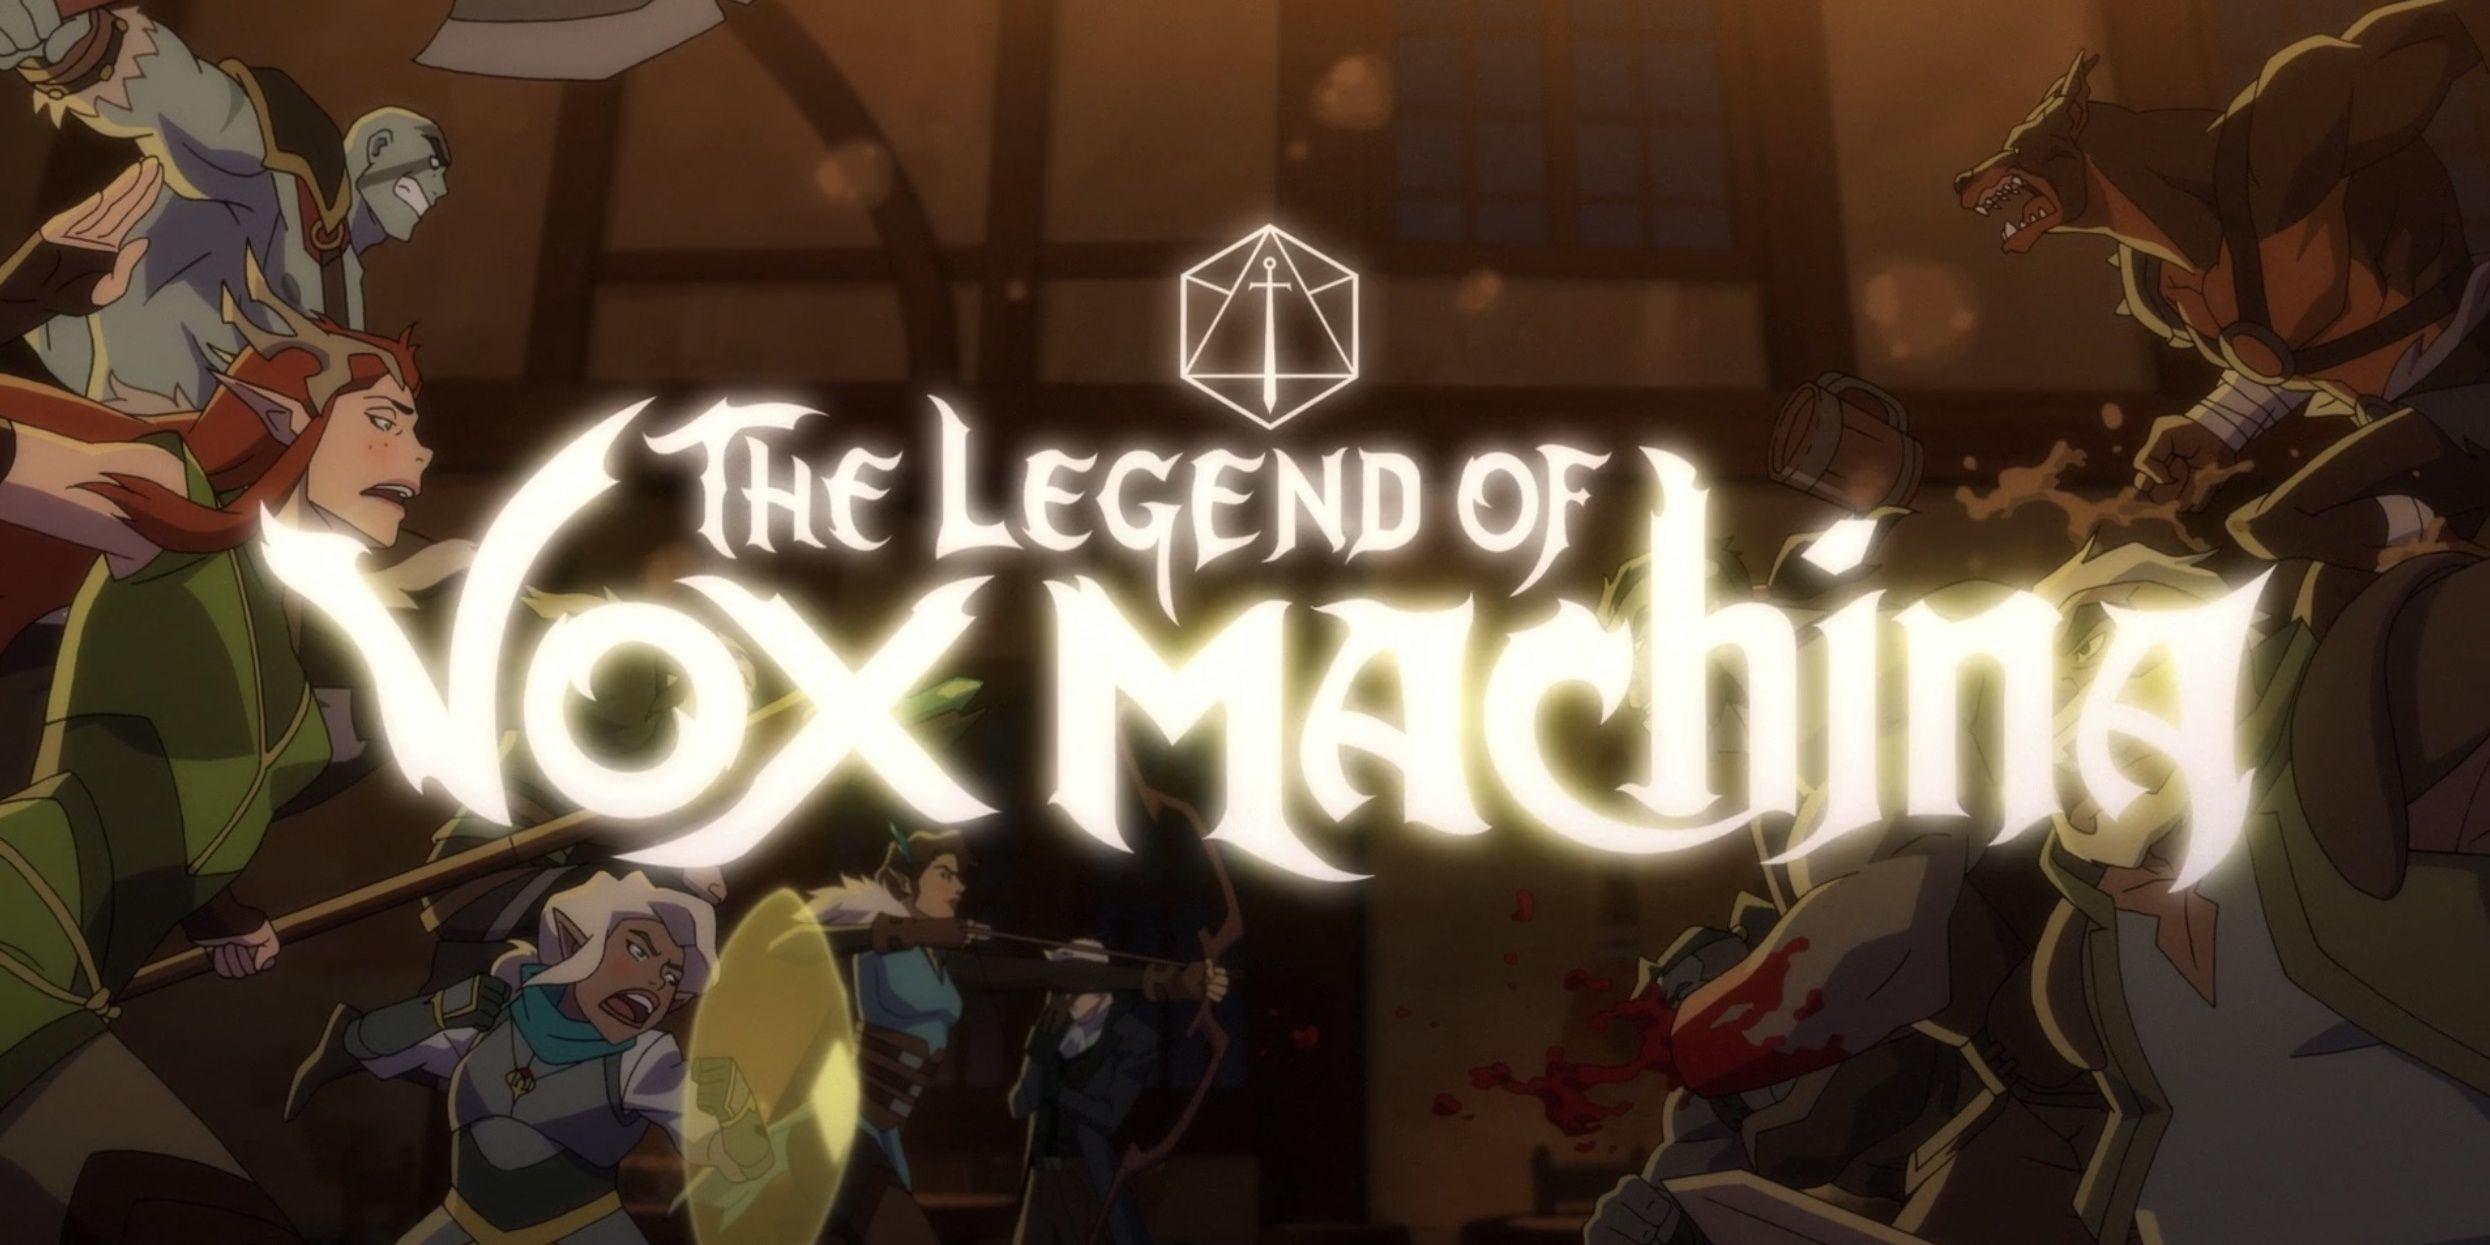 The legend of Vox Machina title card hangs over the group at a bar fight